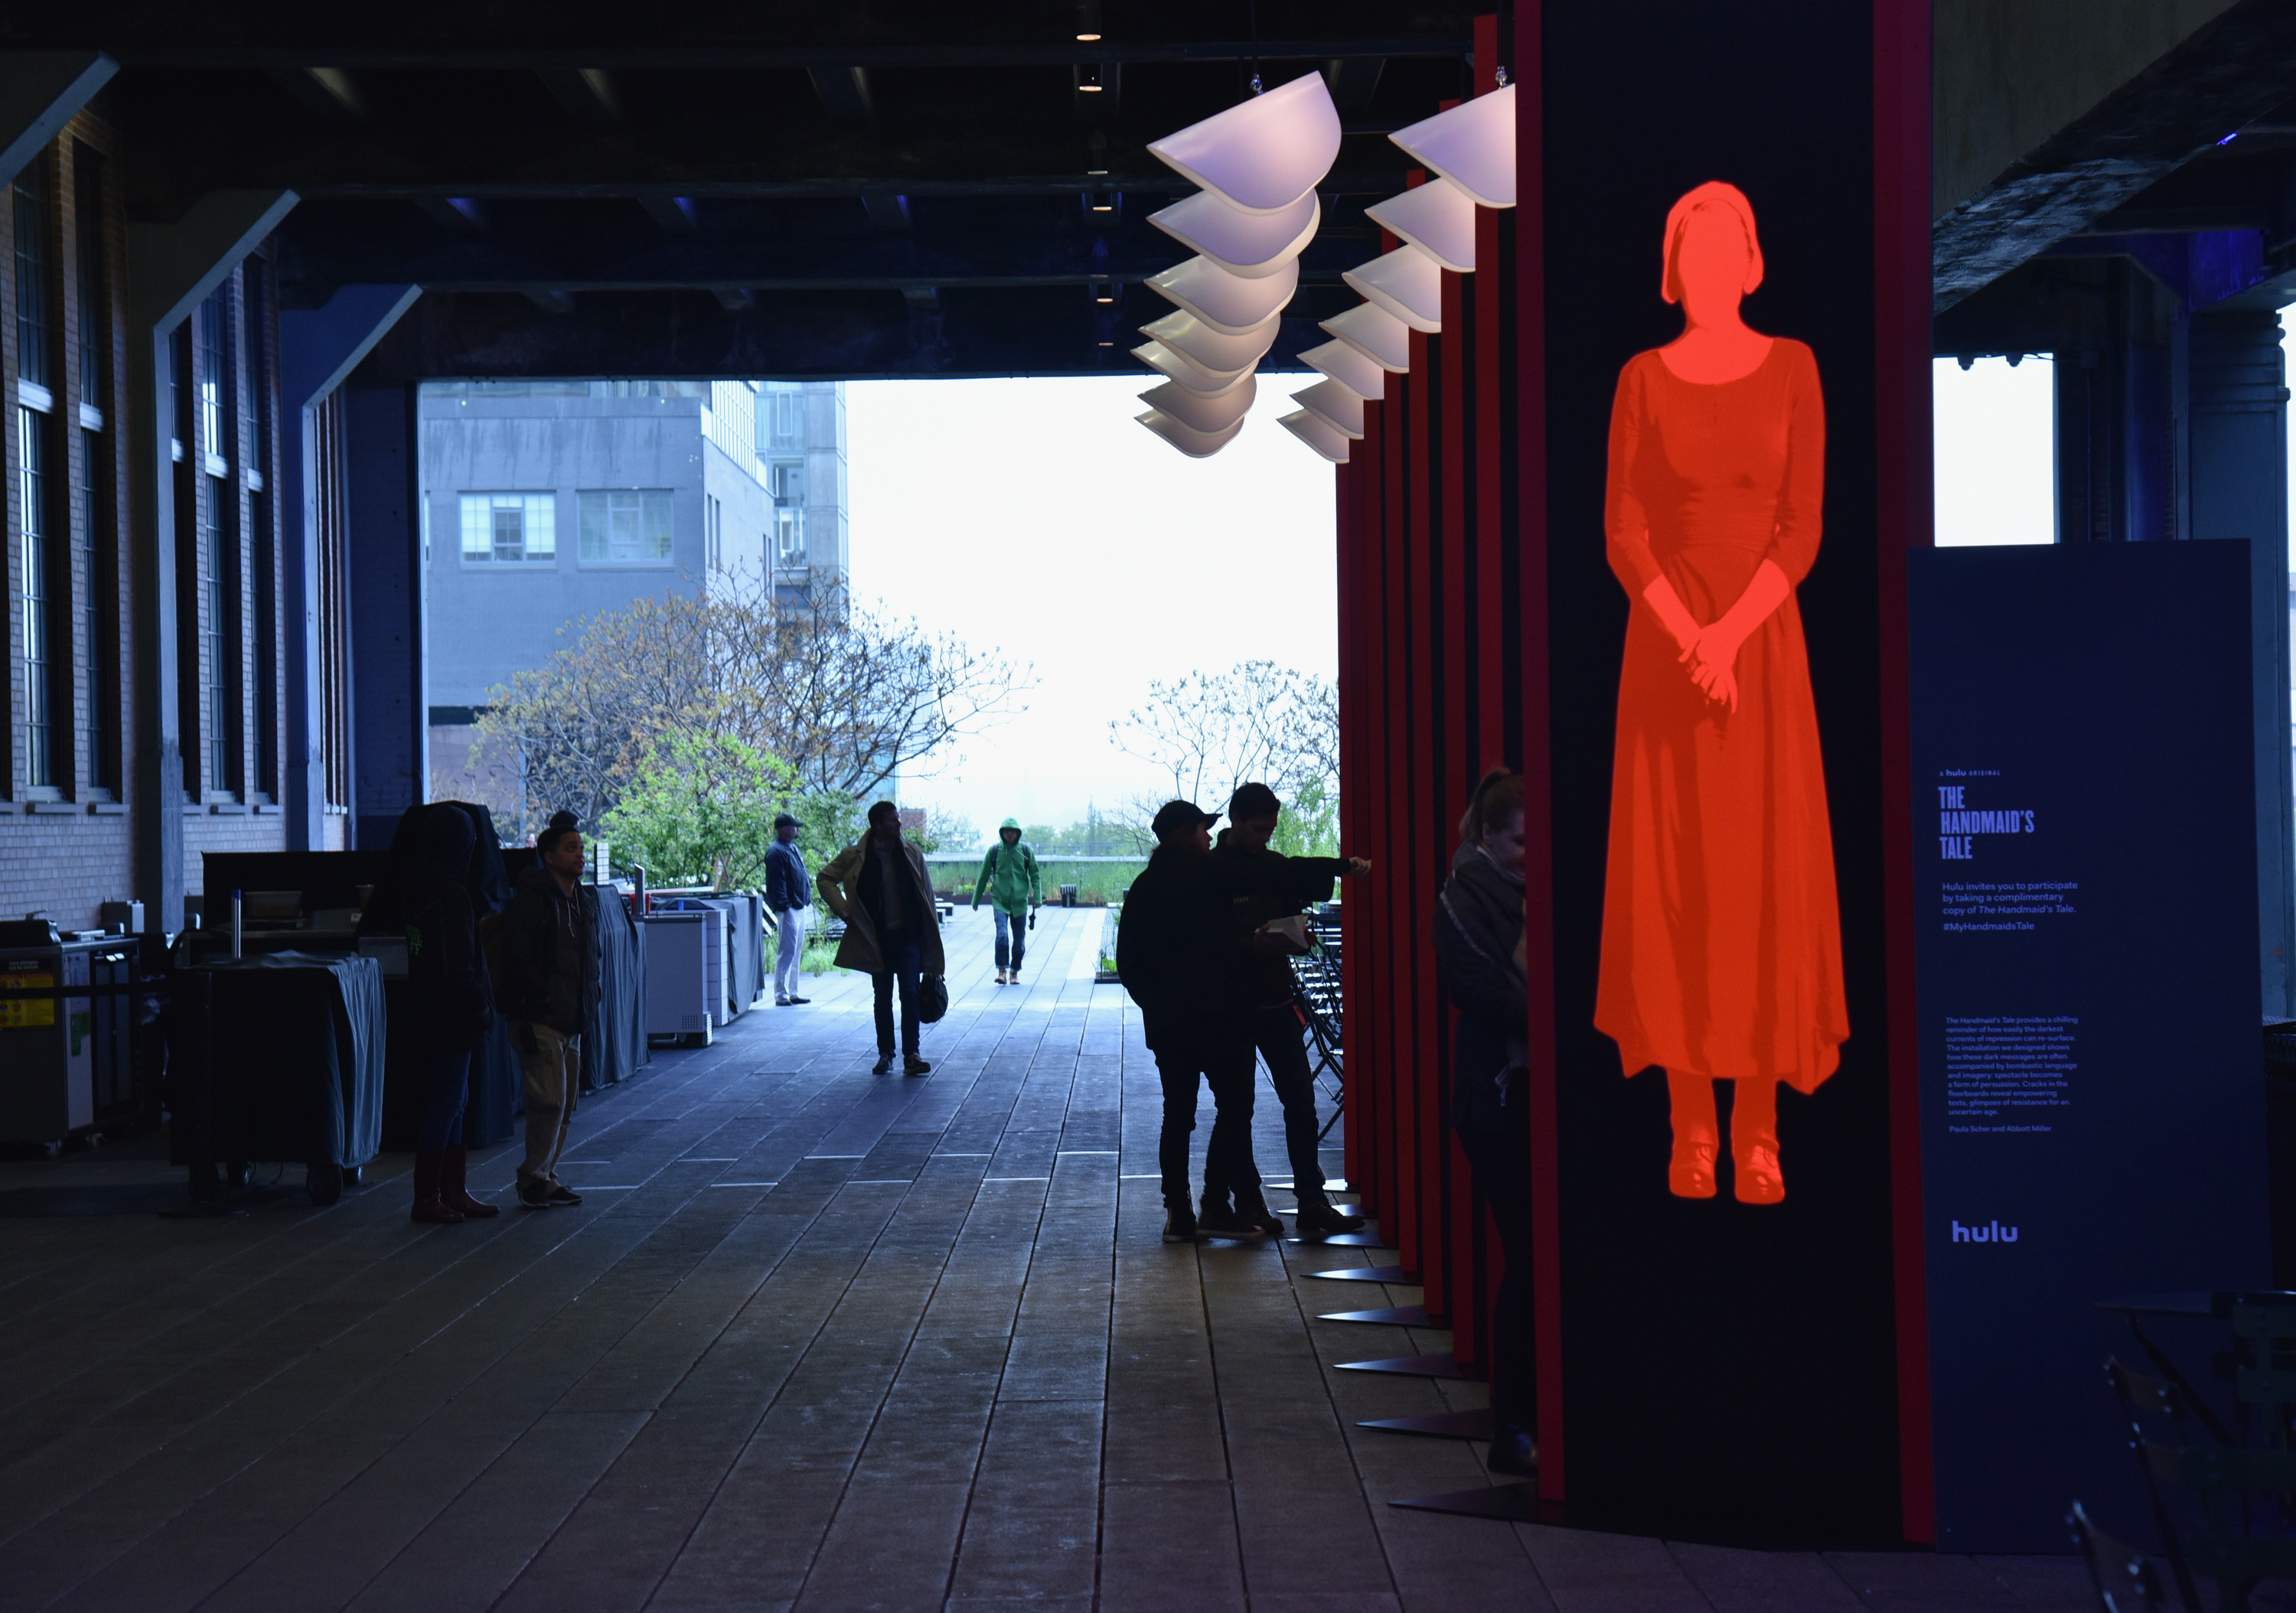 Art Installation And Book Giveaway Celebrating Hulu's 'The Handmaid's Tale' Opens On The High Line In New York City